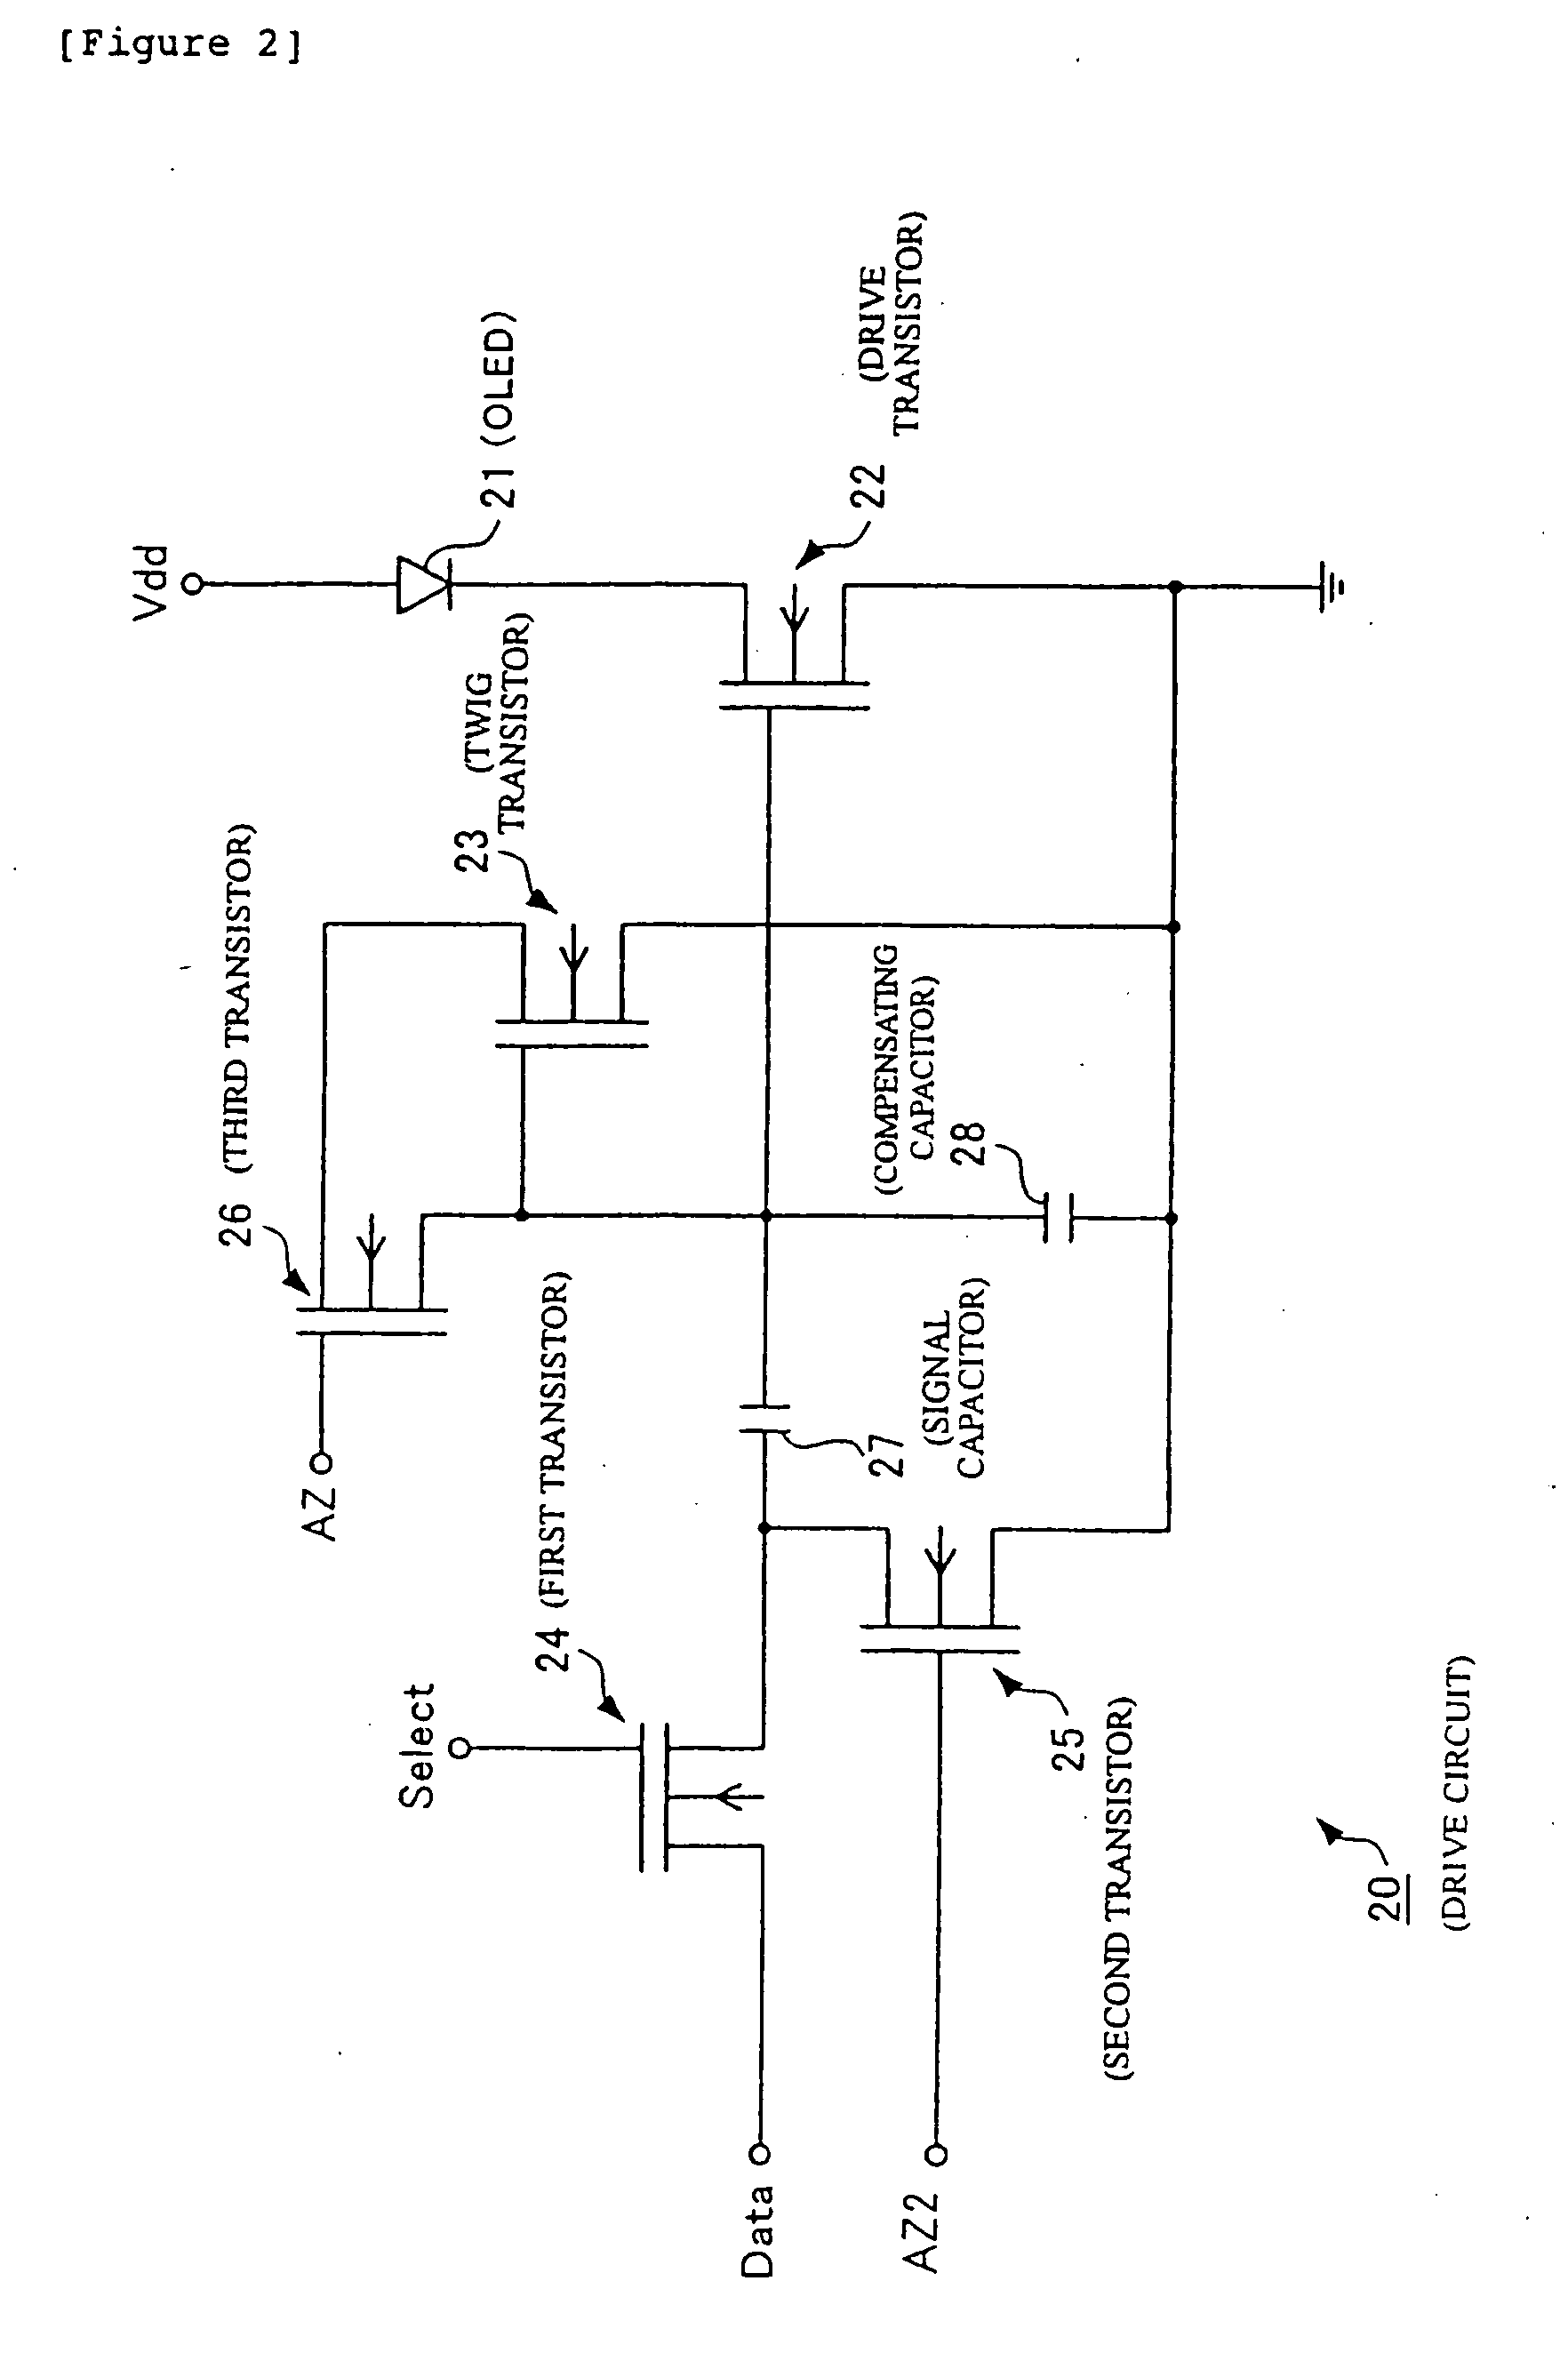 Display unit, drive circuit, amorphous silicon thin-film transistor, and method of driving OLED